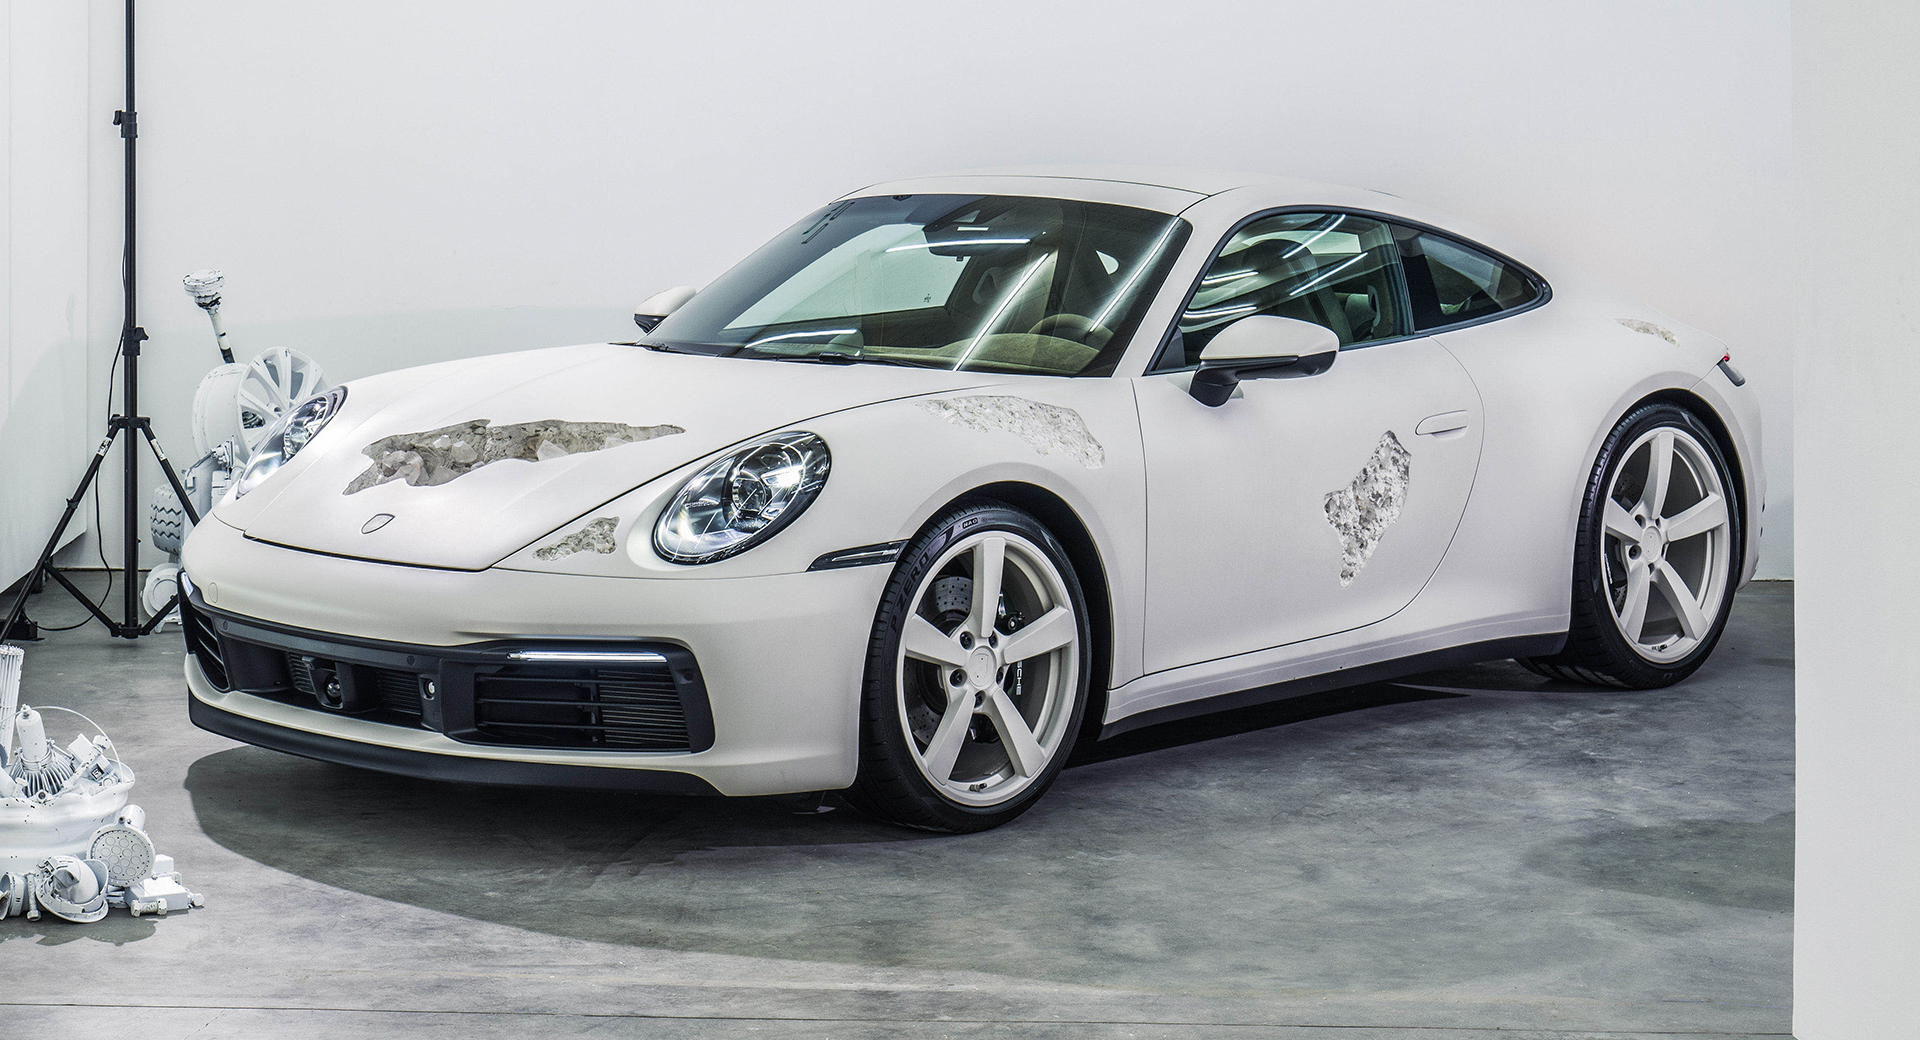 Porsche 911 Carrera 4S 'Crystal Eroded' Art Car Is Supposed To Showcase 'A  Timeless Machine' | Carscoops